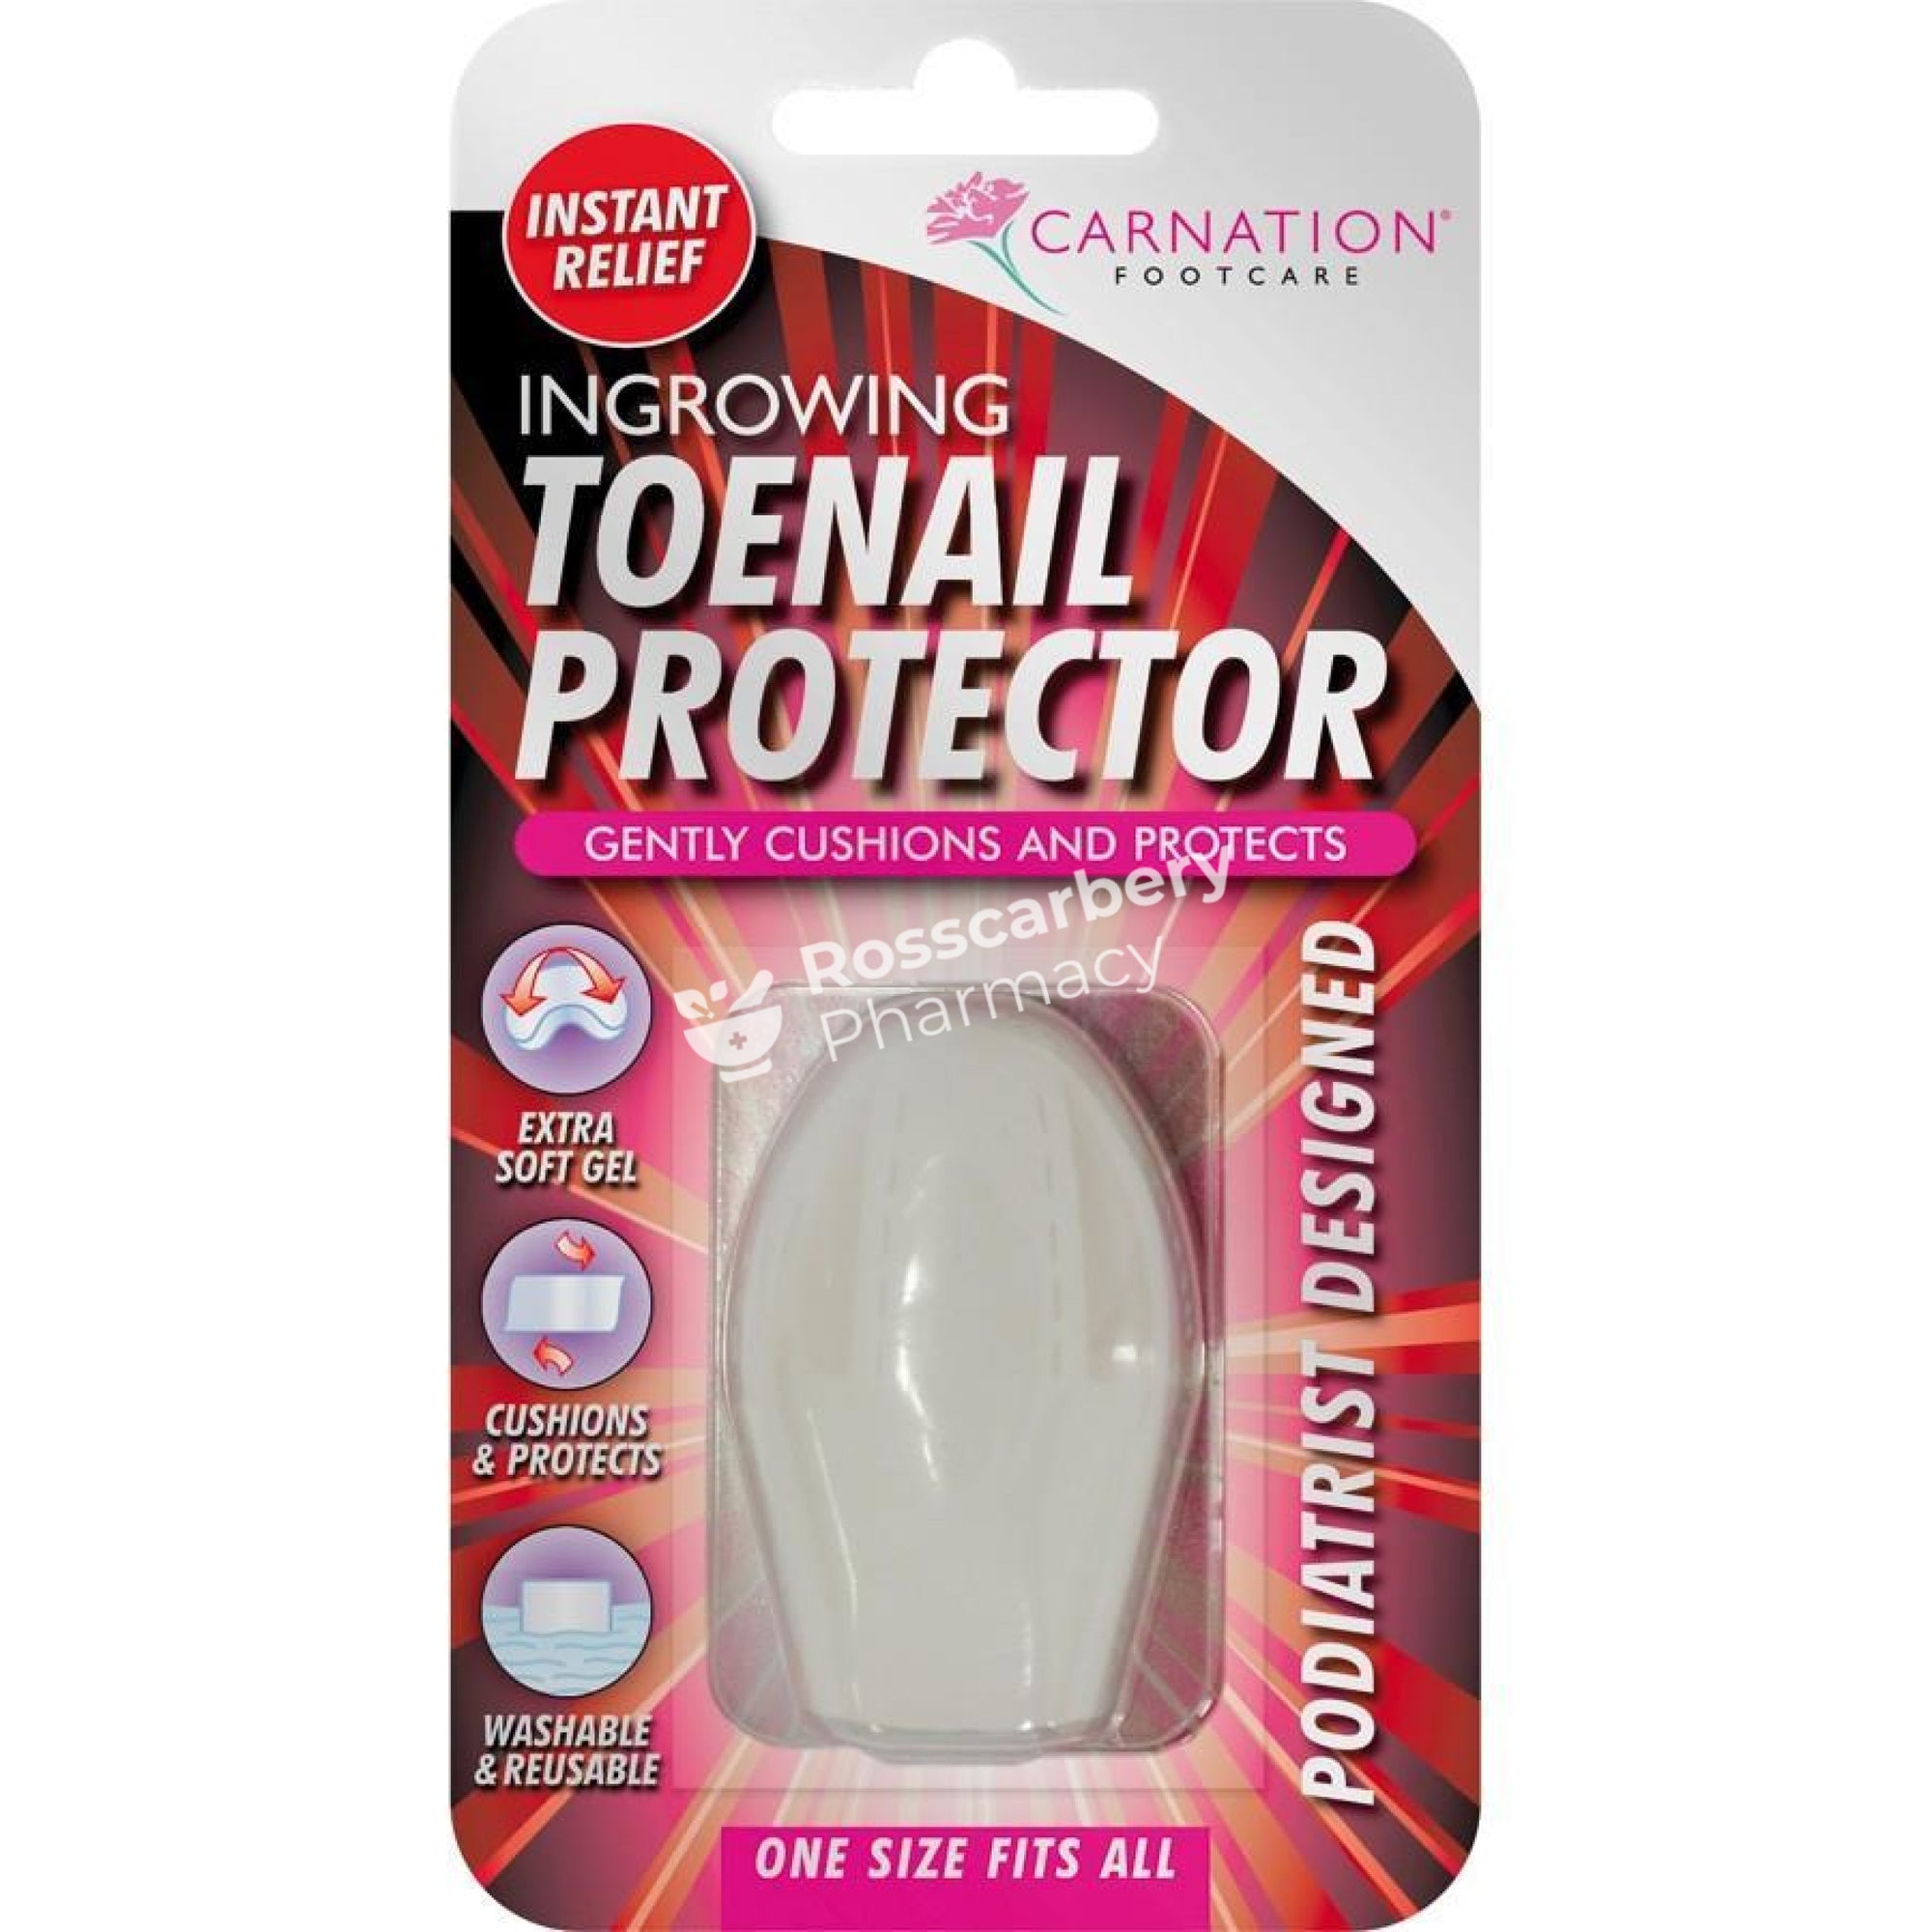 Carnation Footcare Ingrowing Toenail Protector - One Size Toe & Nail Care